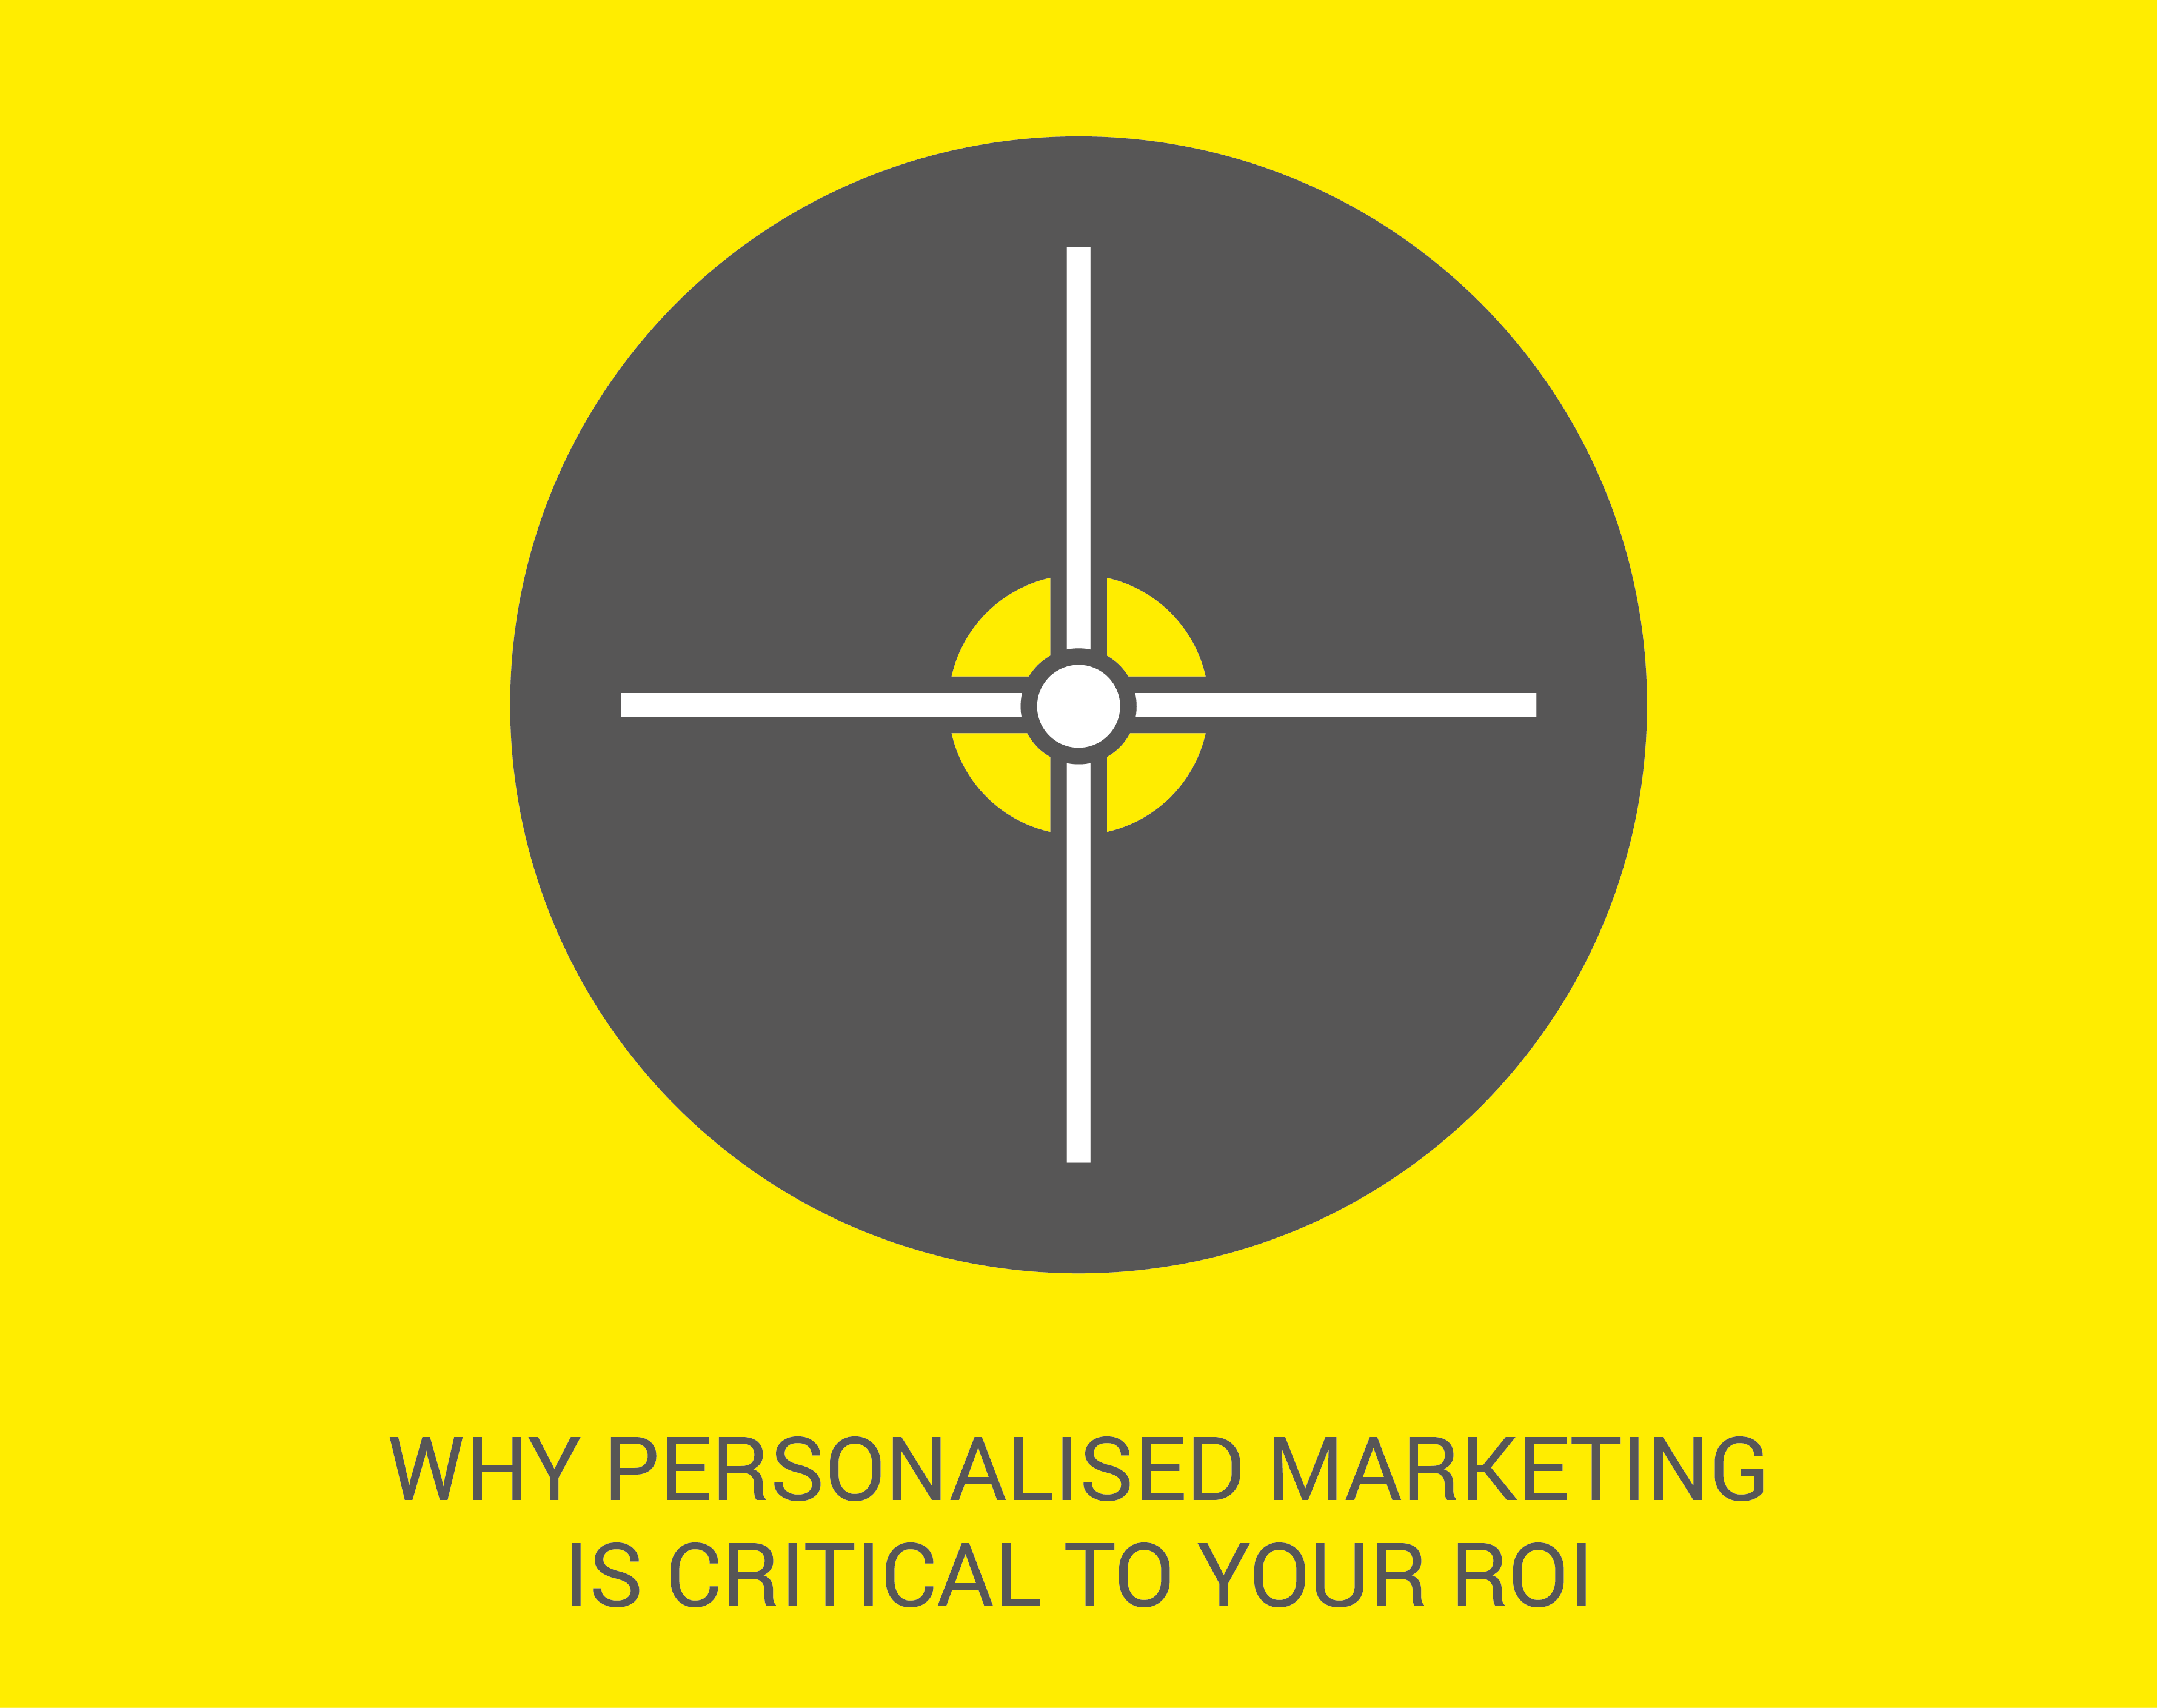 Why Personalised Marketing is Critical to your ROI